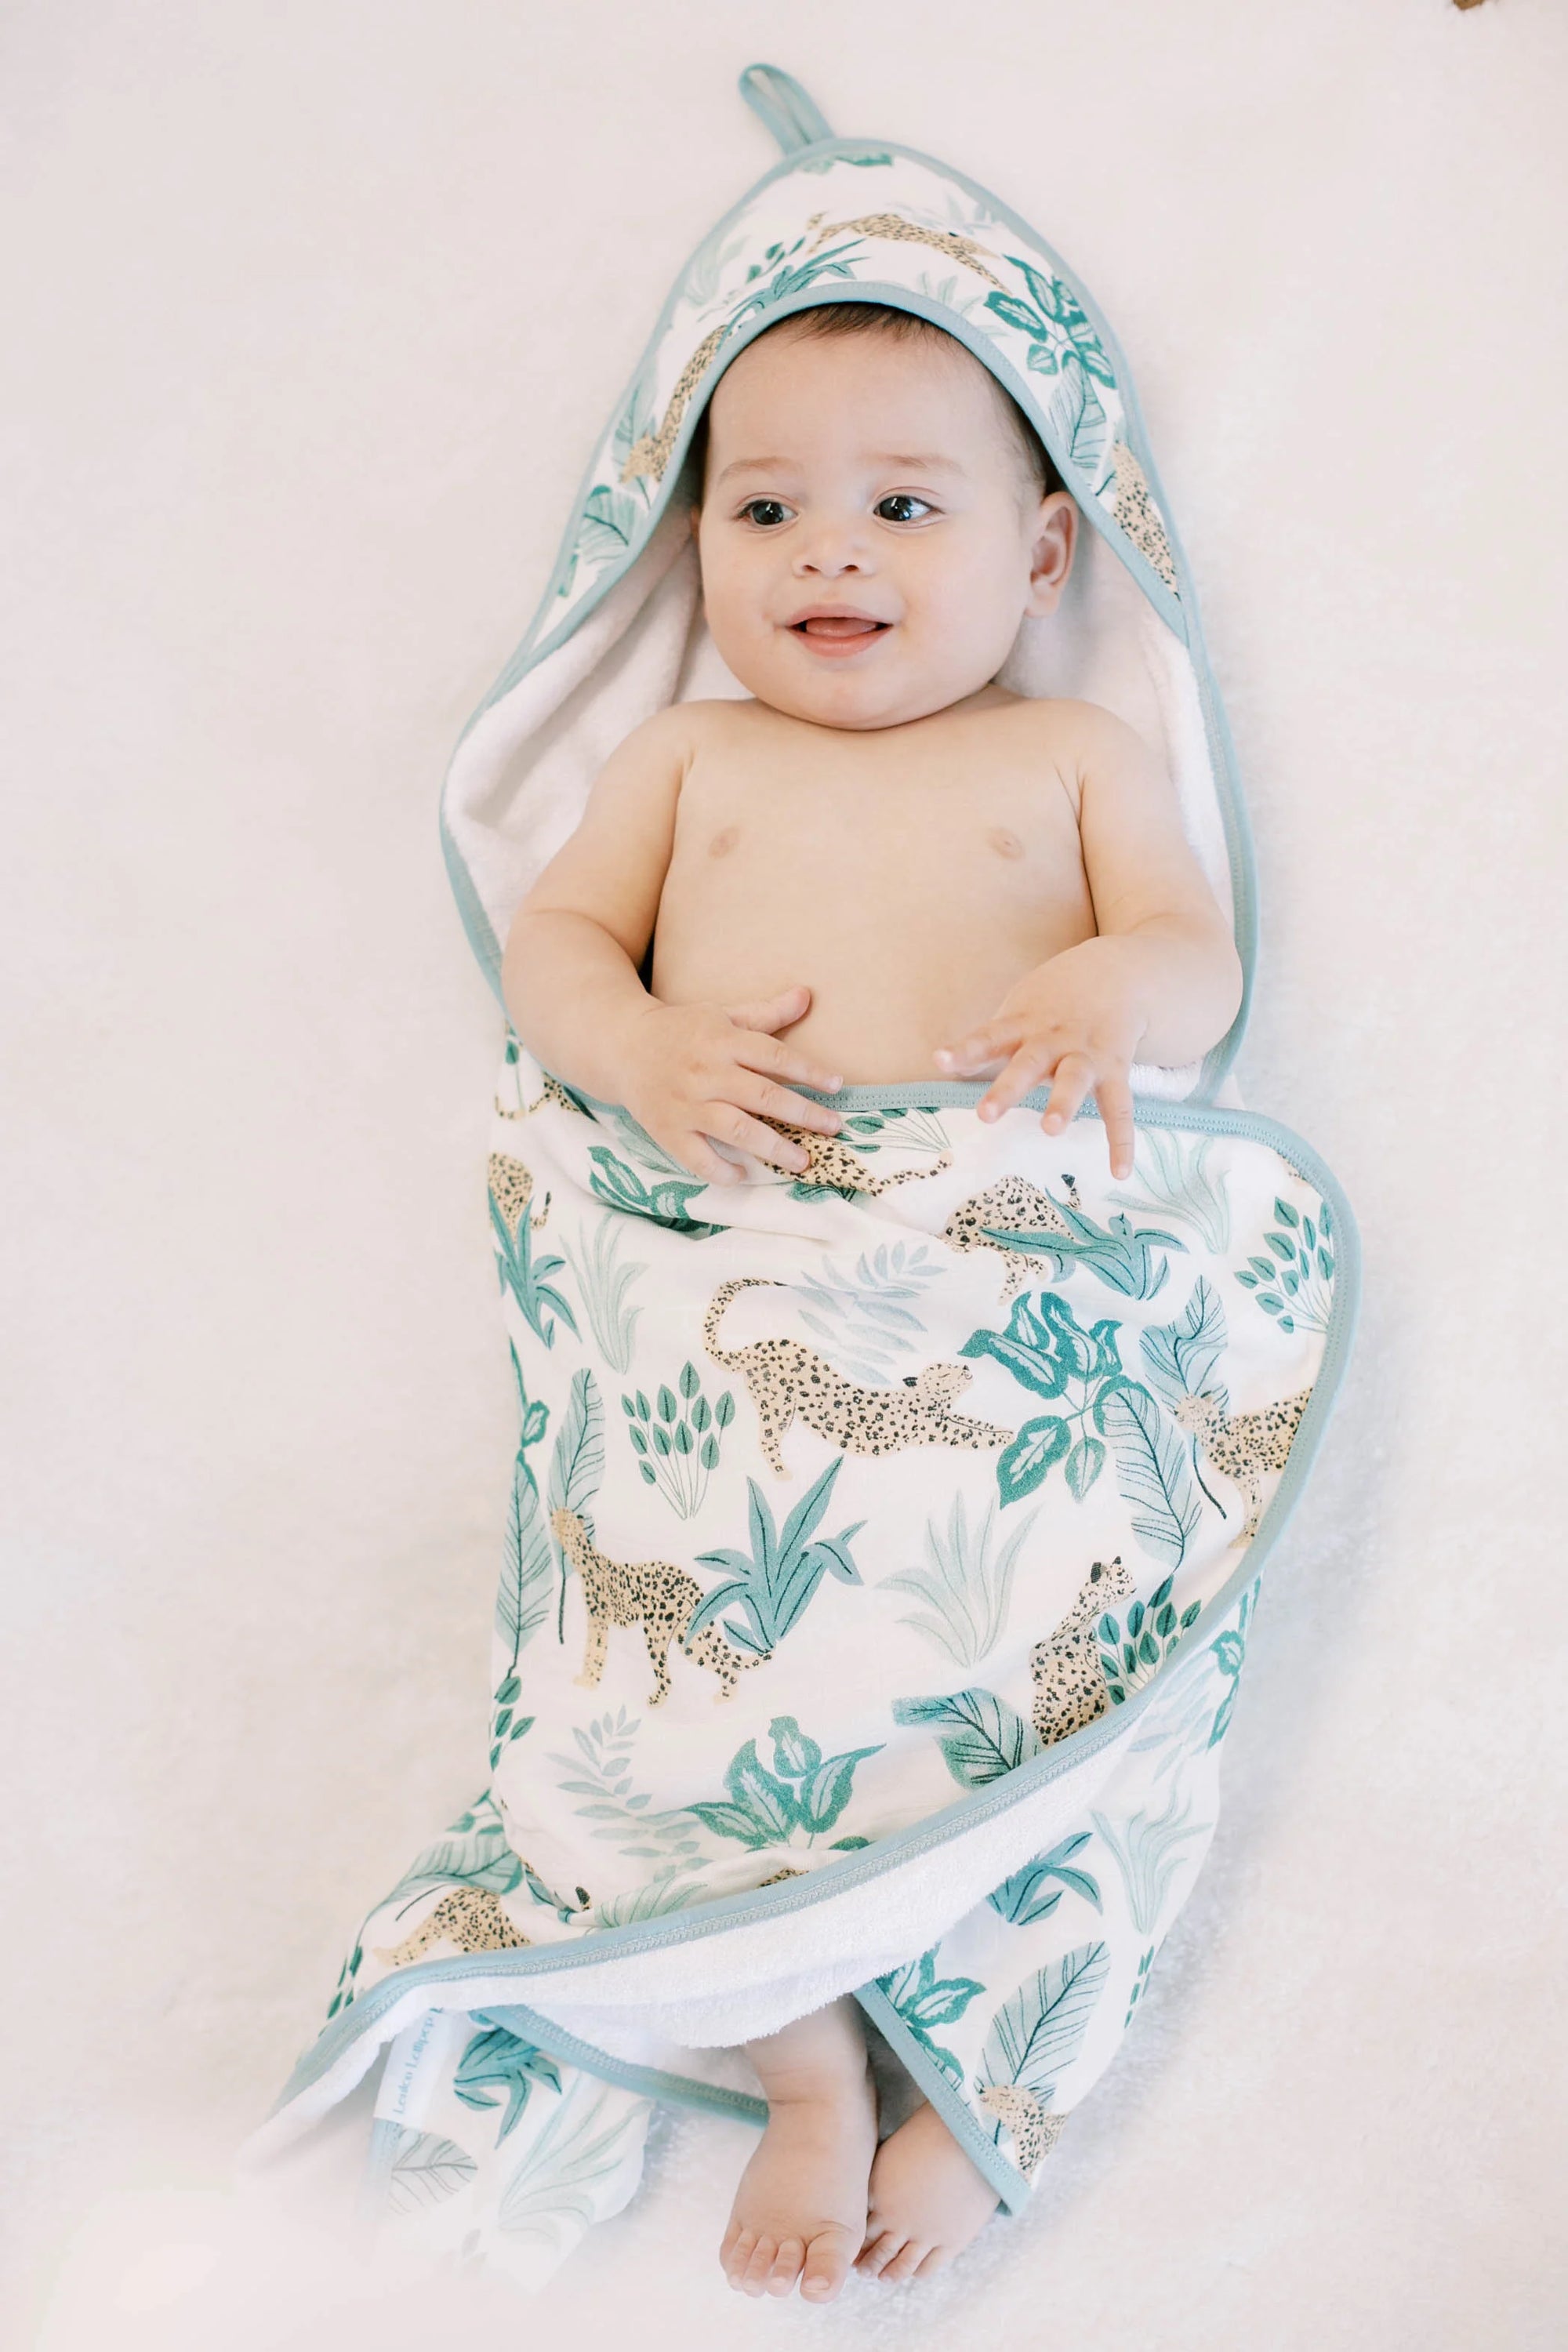 Loulou Lollipop Hooded Towel and Washcloth Set - Tropical Jungle